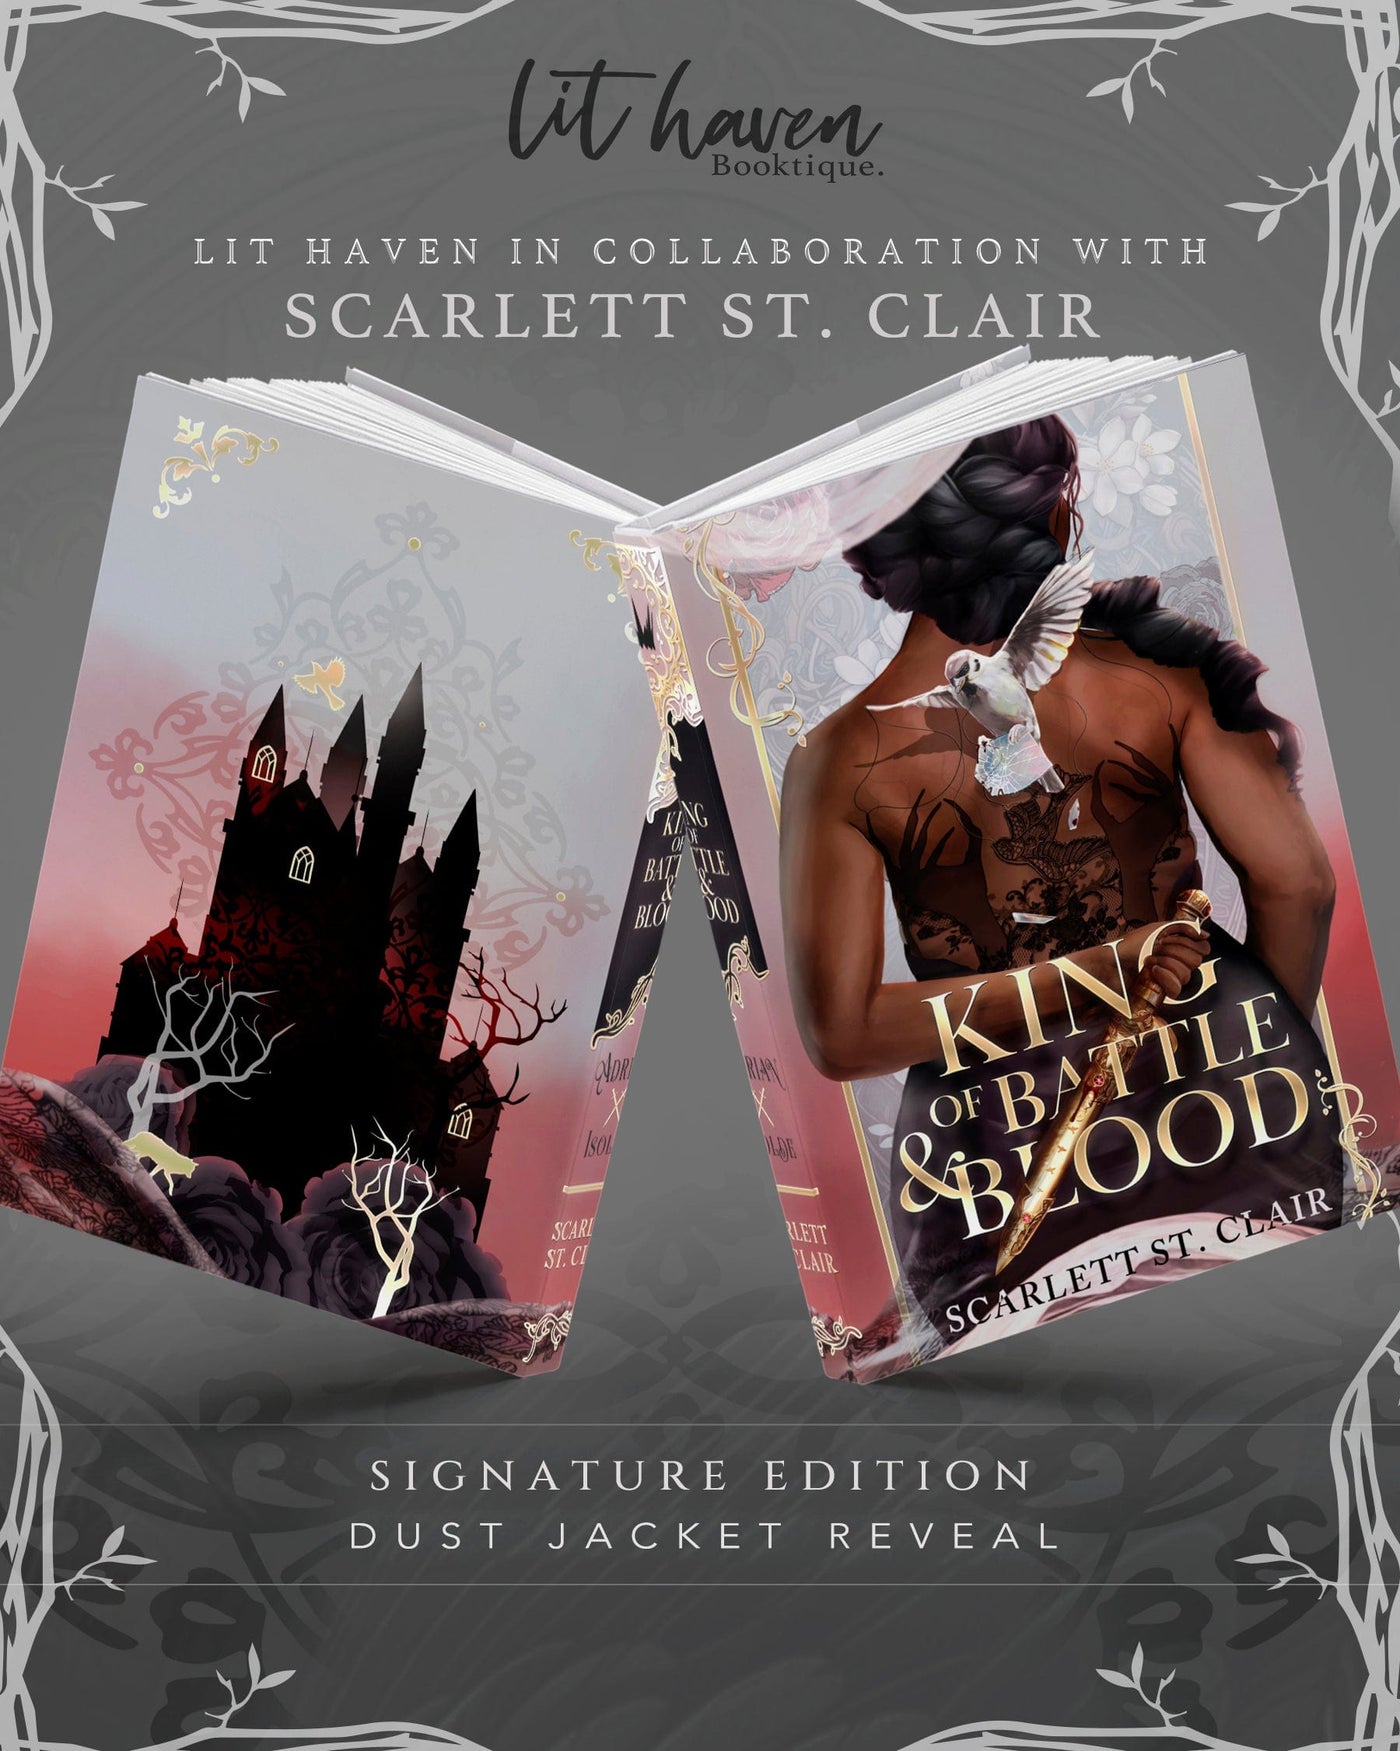 Lit Haven Booktique Book BUNDLE PREORDER - The Book of Azrael + King of Battle and Blood